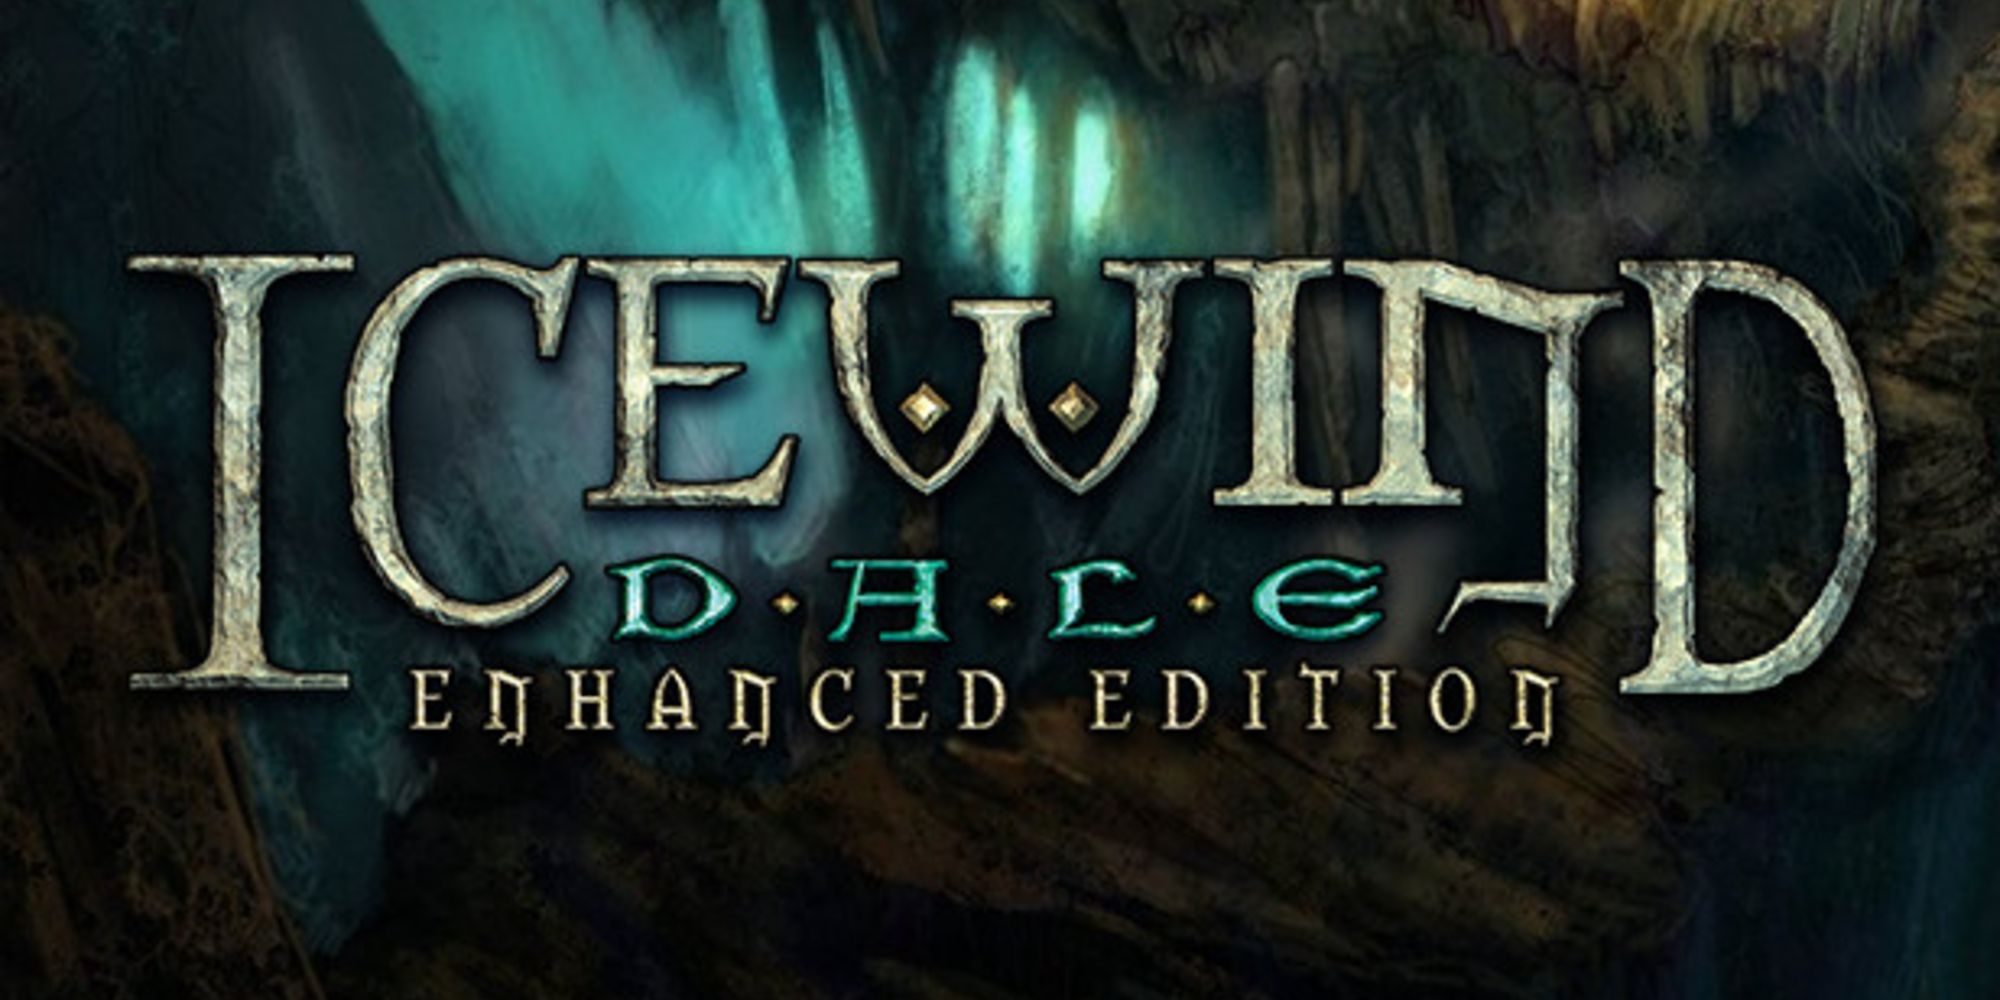 icewind dale dungeons and dragons